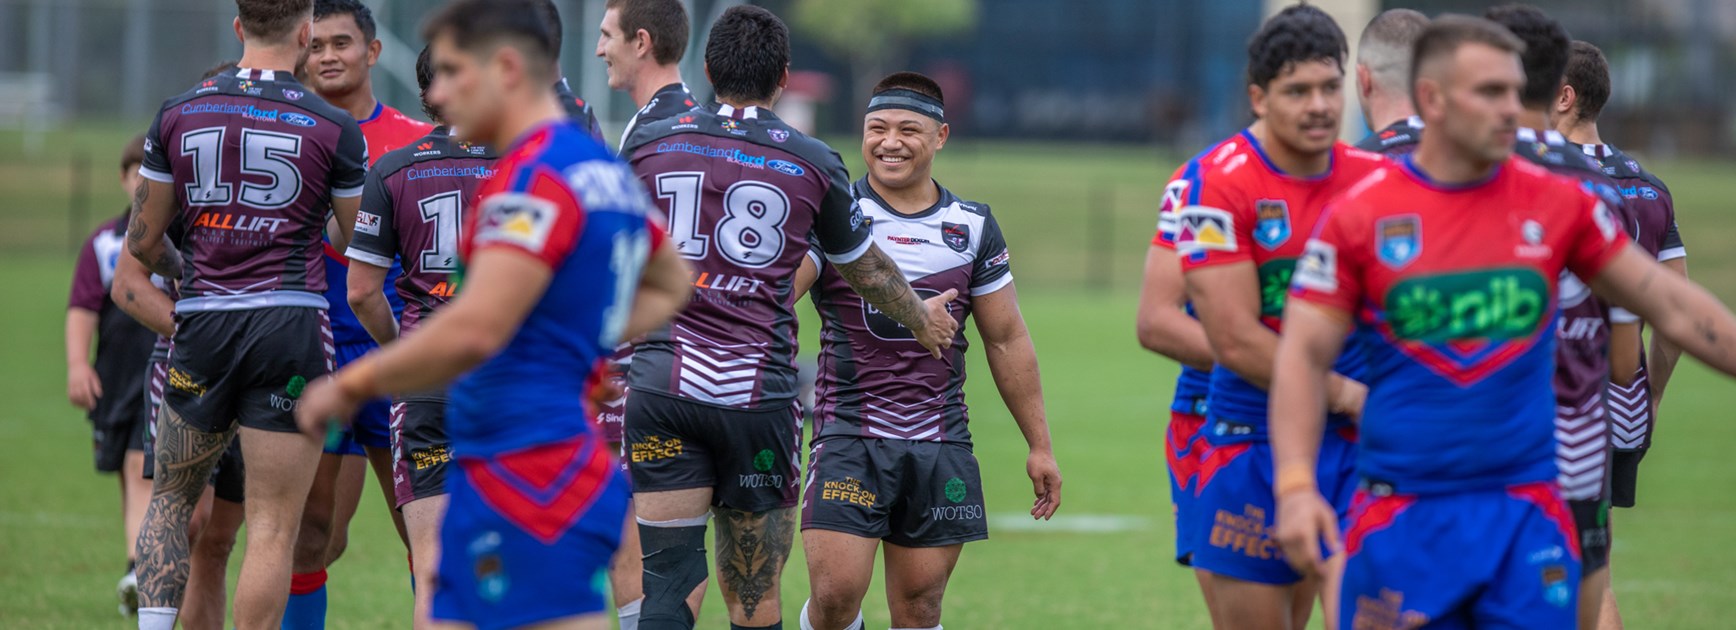 Blacktown Workers out to make it two straight wins